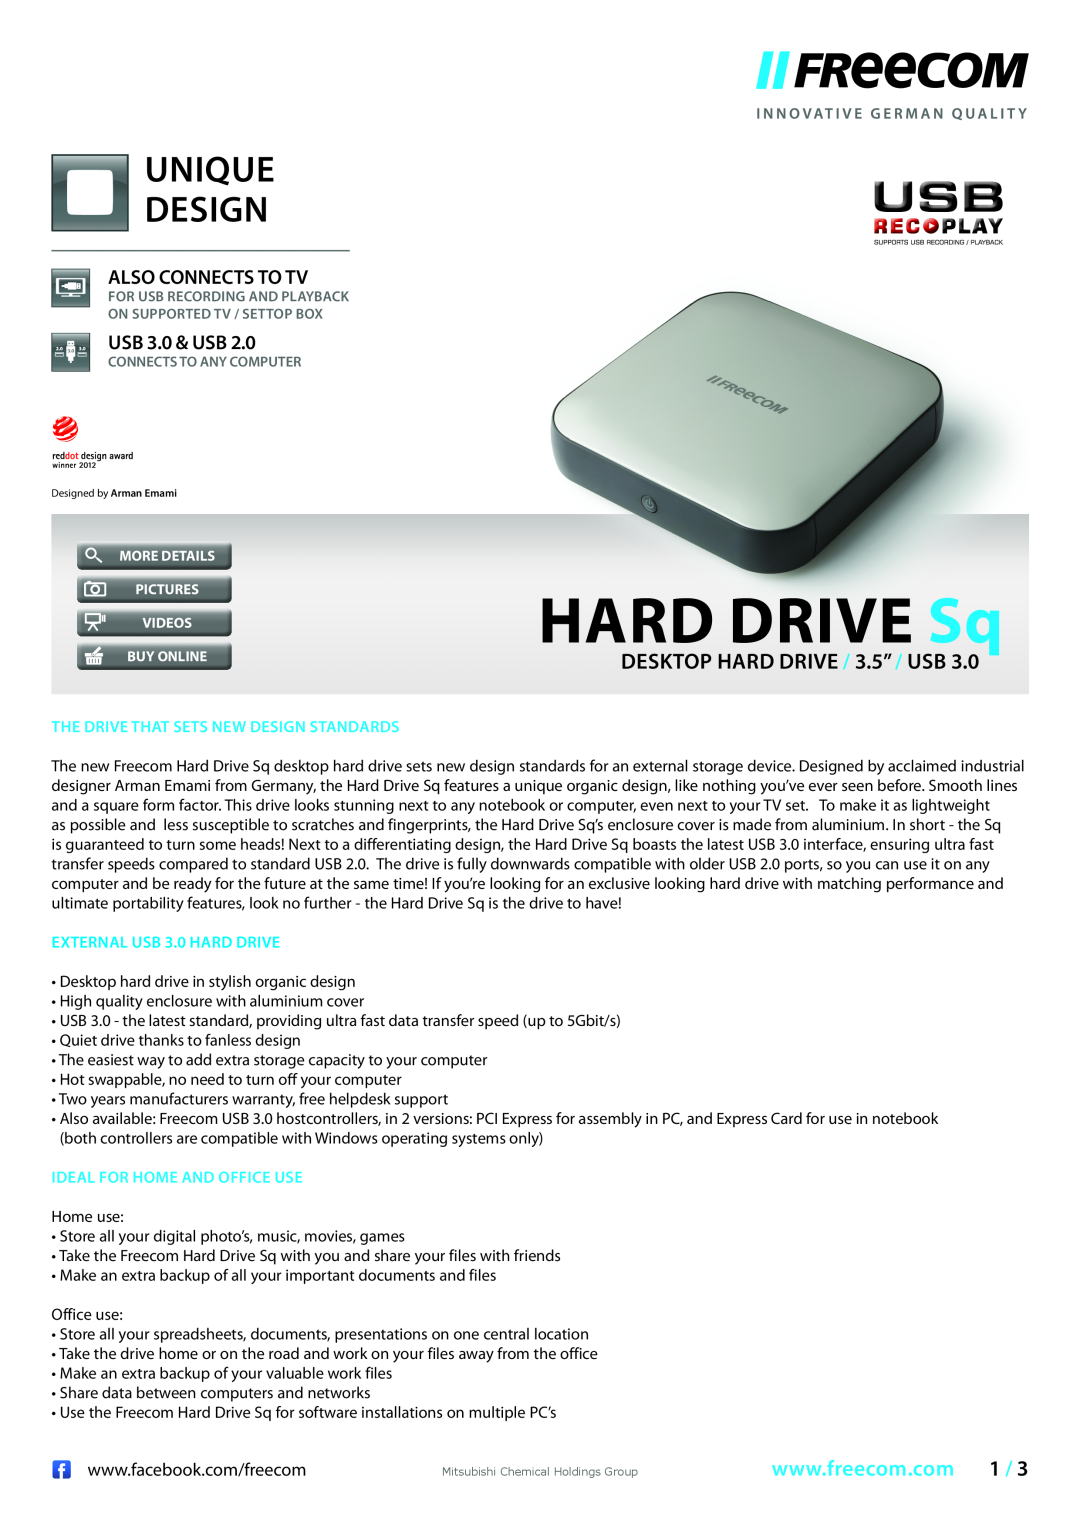 Freecom Technologies 97805 warranty The Drive That Sets New Design Standards, Ideal For Home And Office Use, HARD DRIVE Sq 